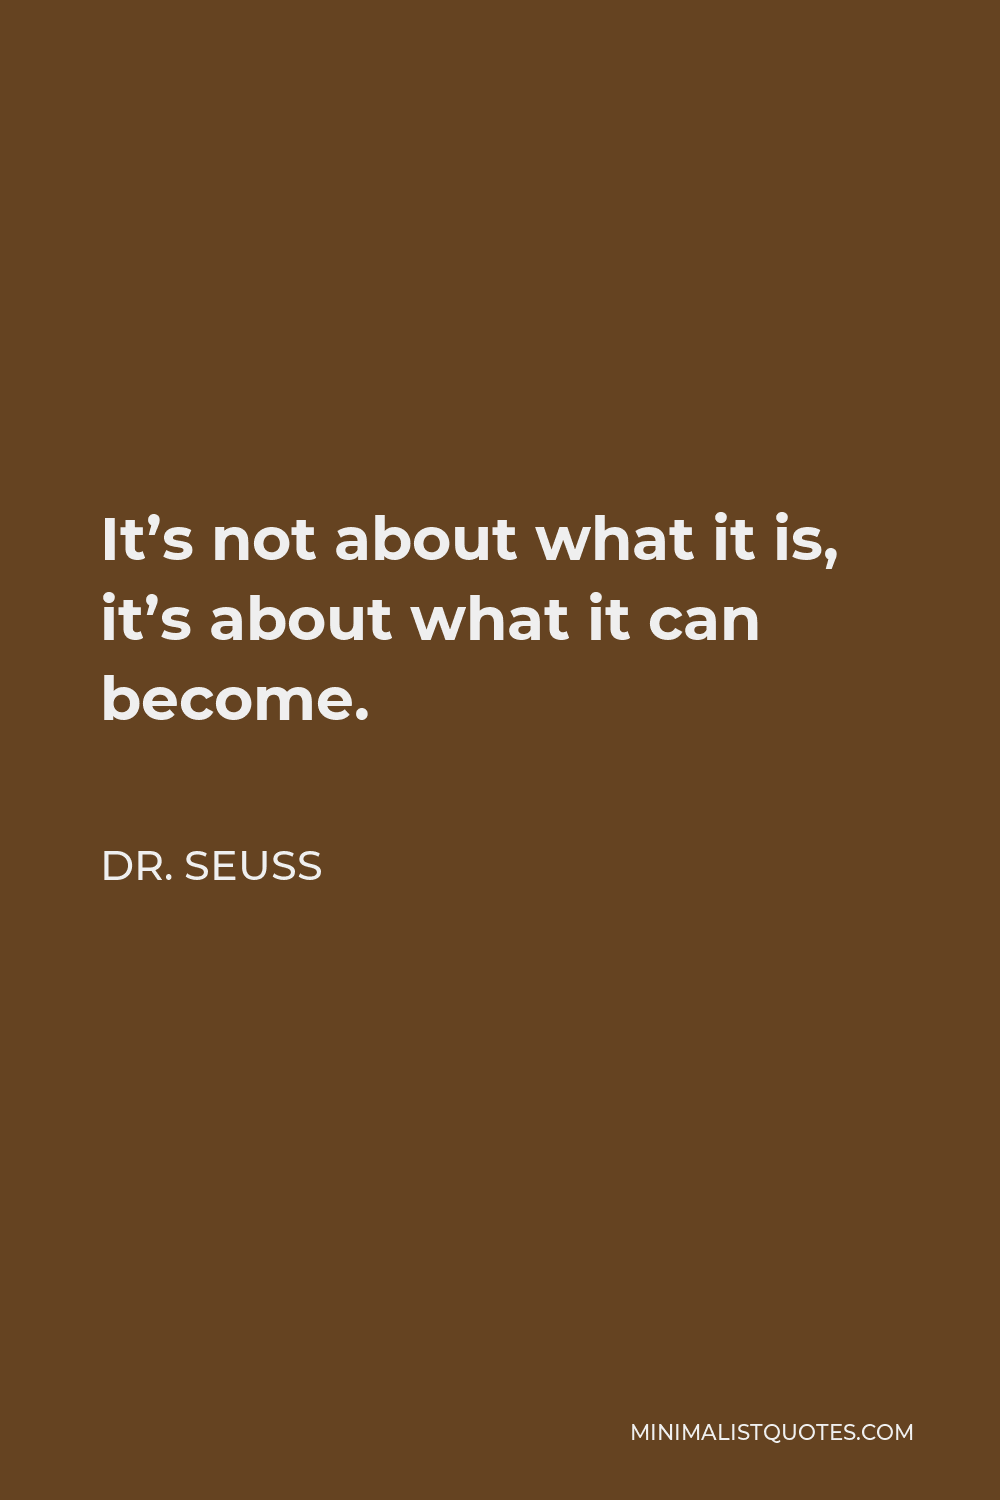 Dr. Seuss Quote: It's not about what it is, it's about what it can become.